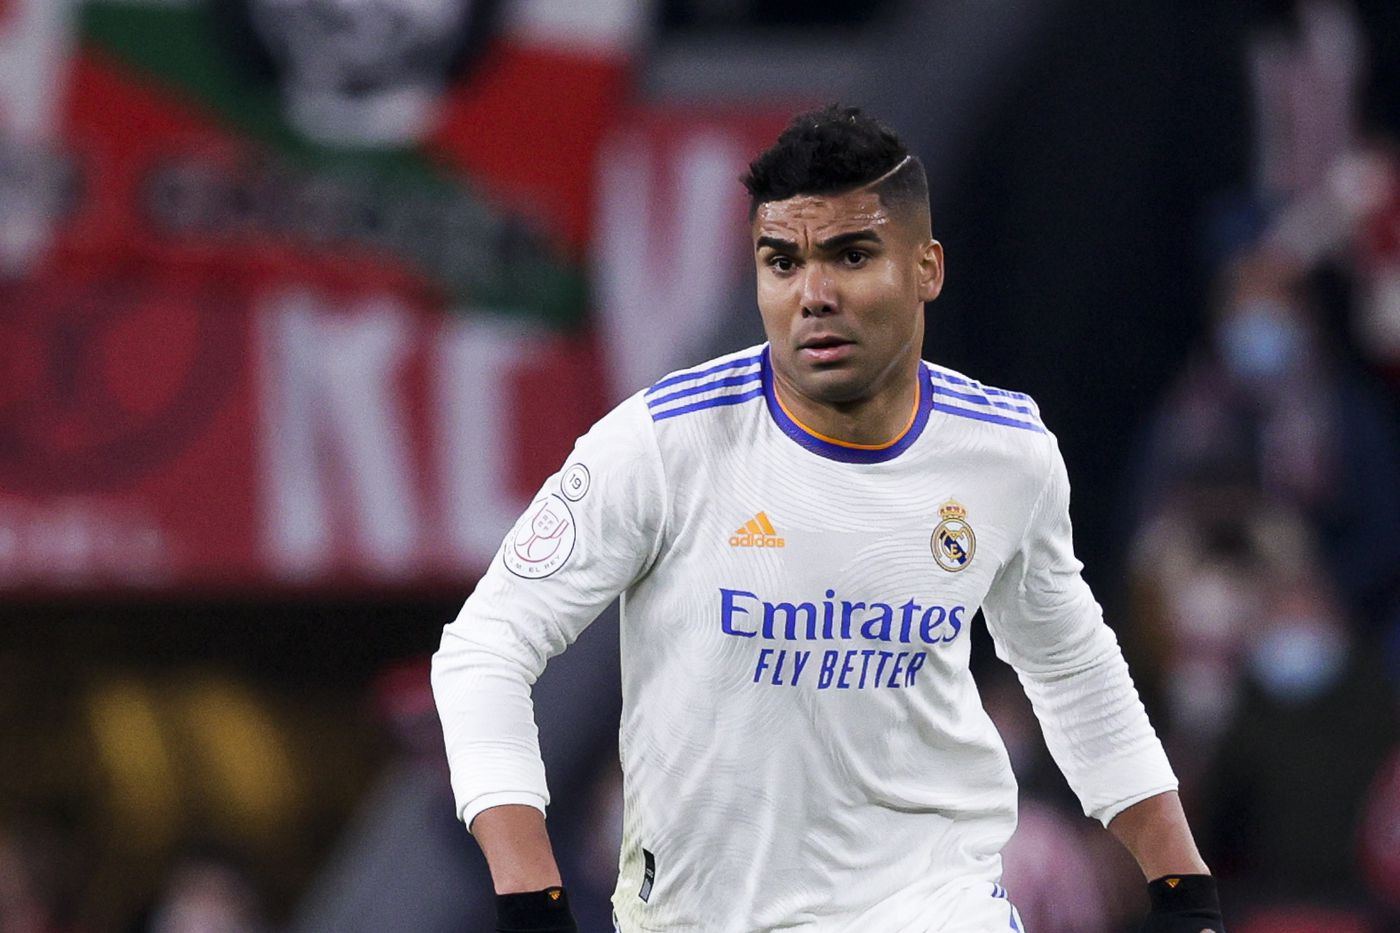 Manchester United reaches agreement with Real Madrid for Casemiro